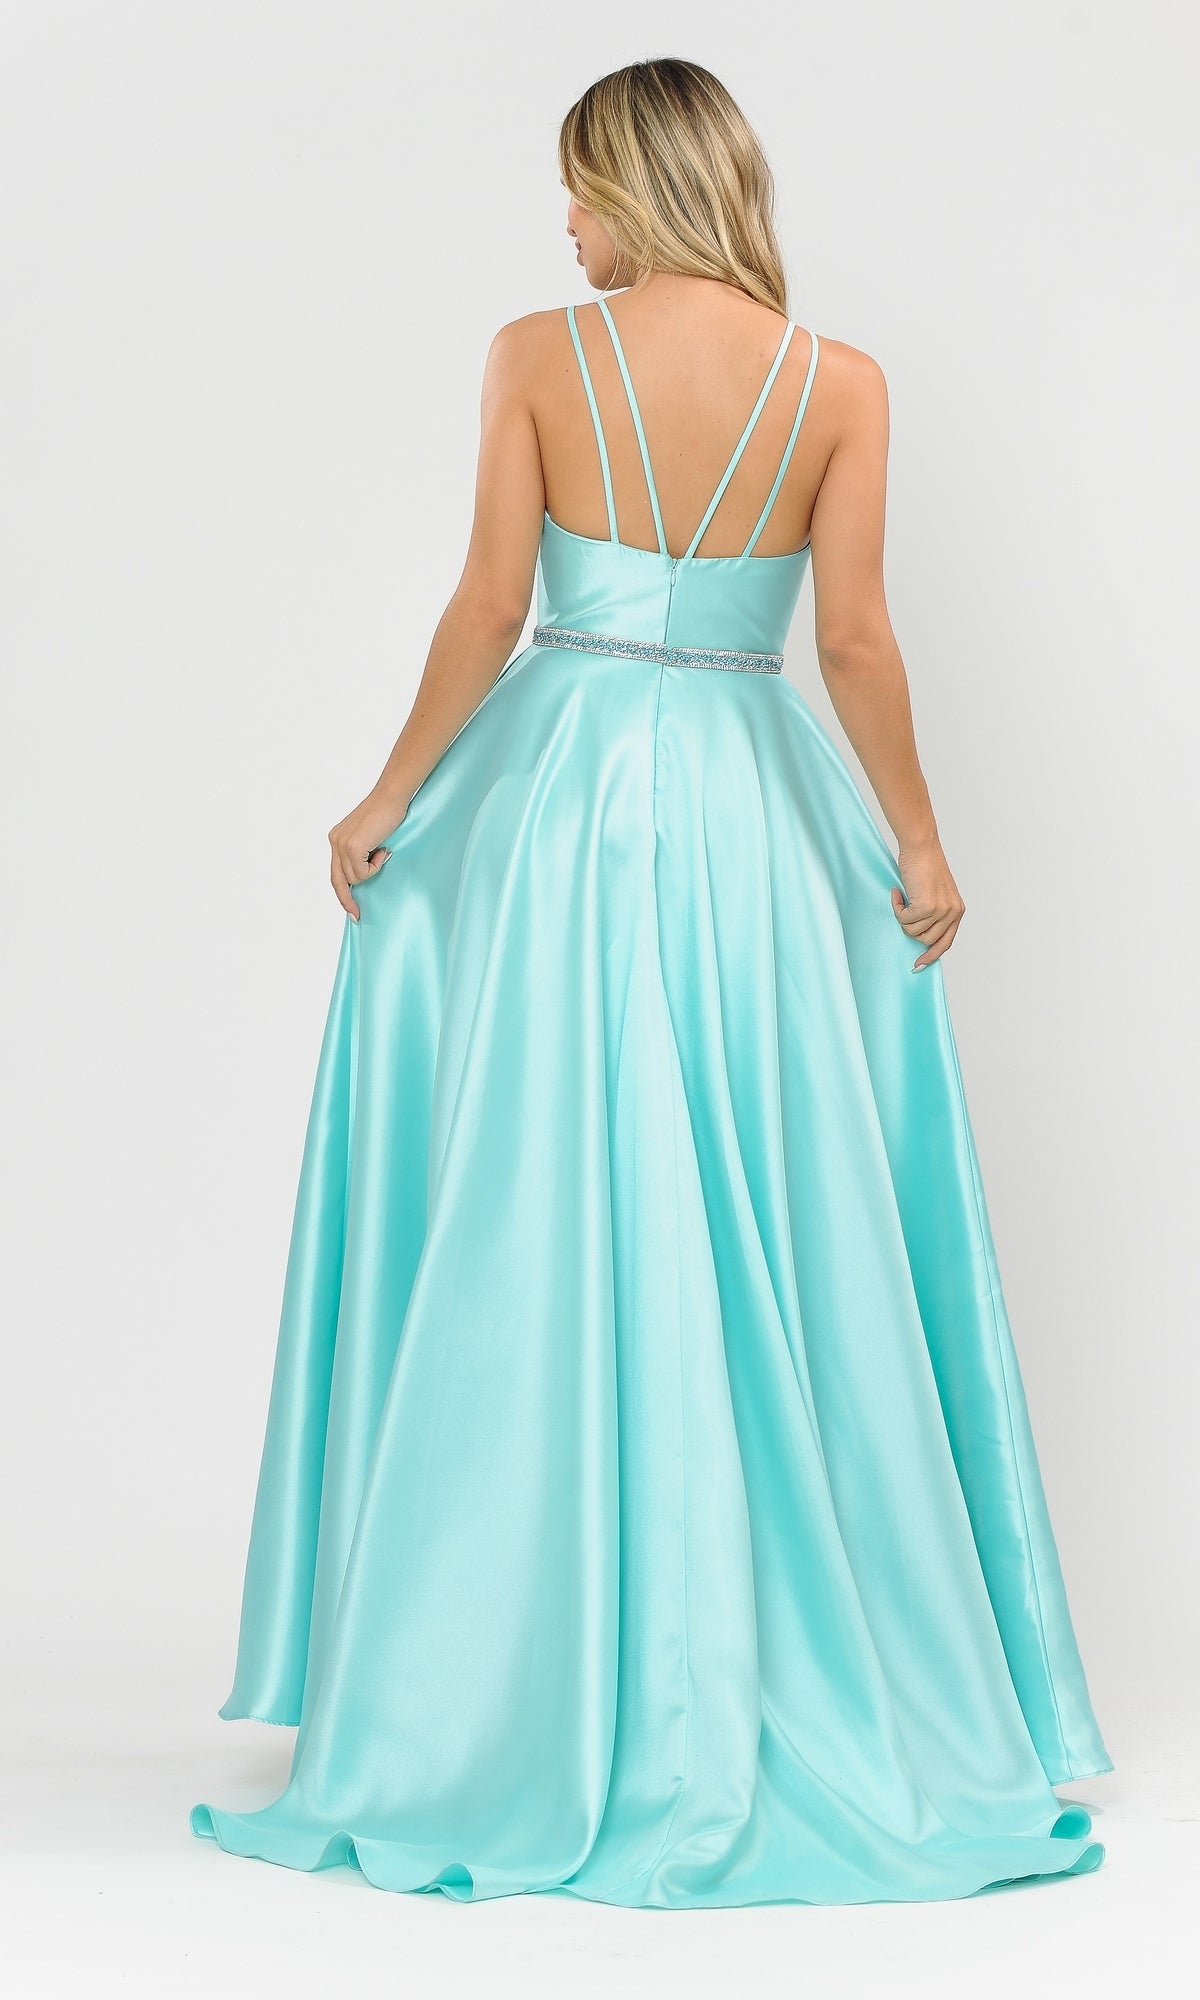 Long A-Line Mikado Prom Gown 8690 with Pockets